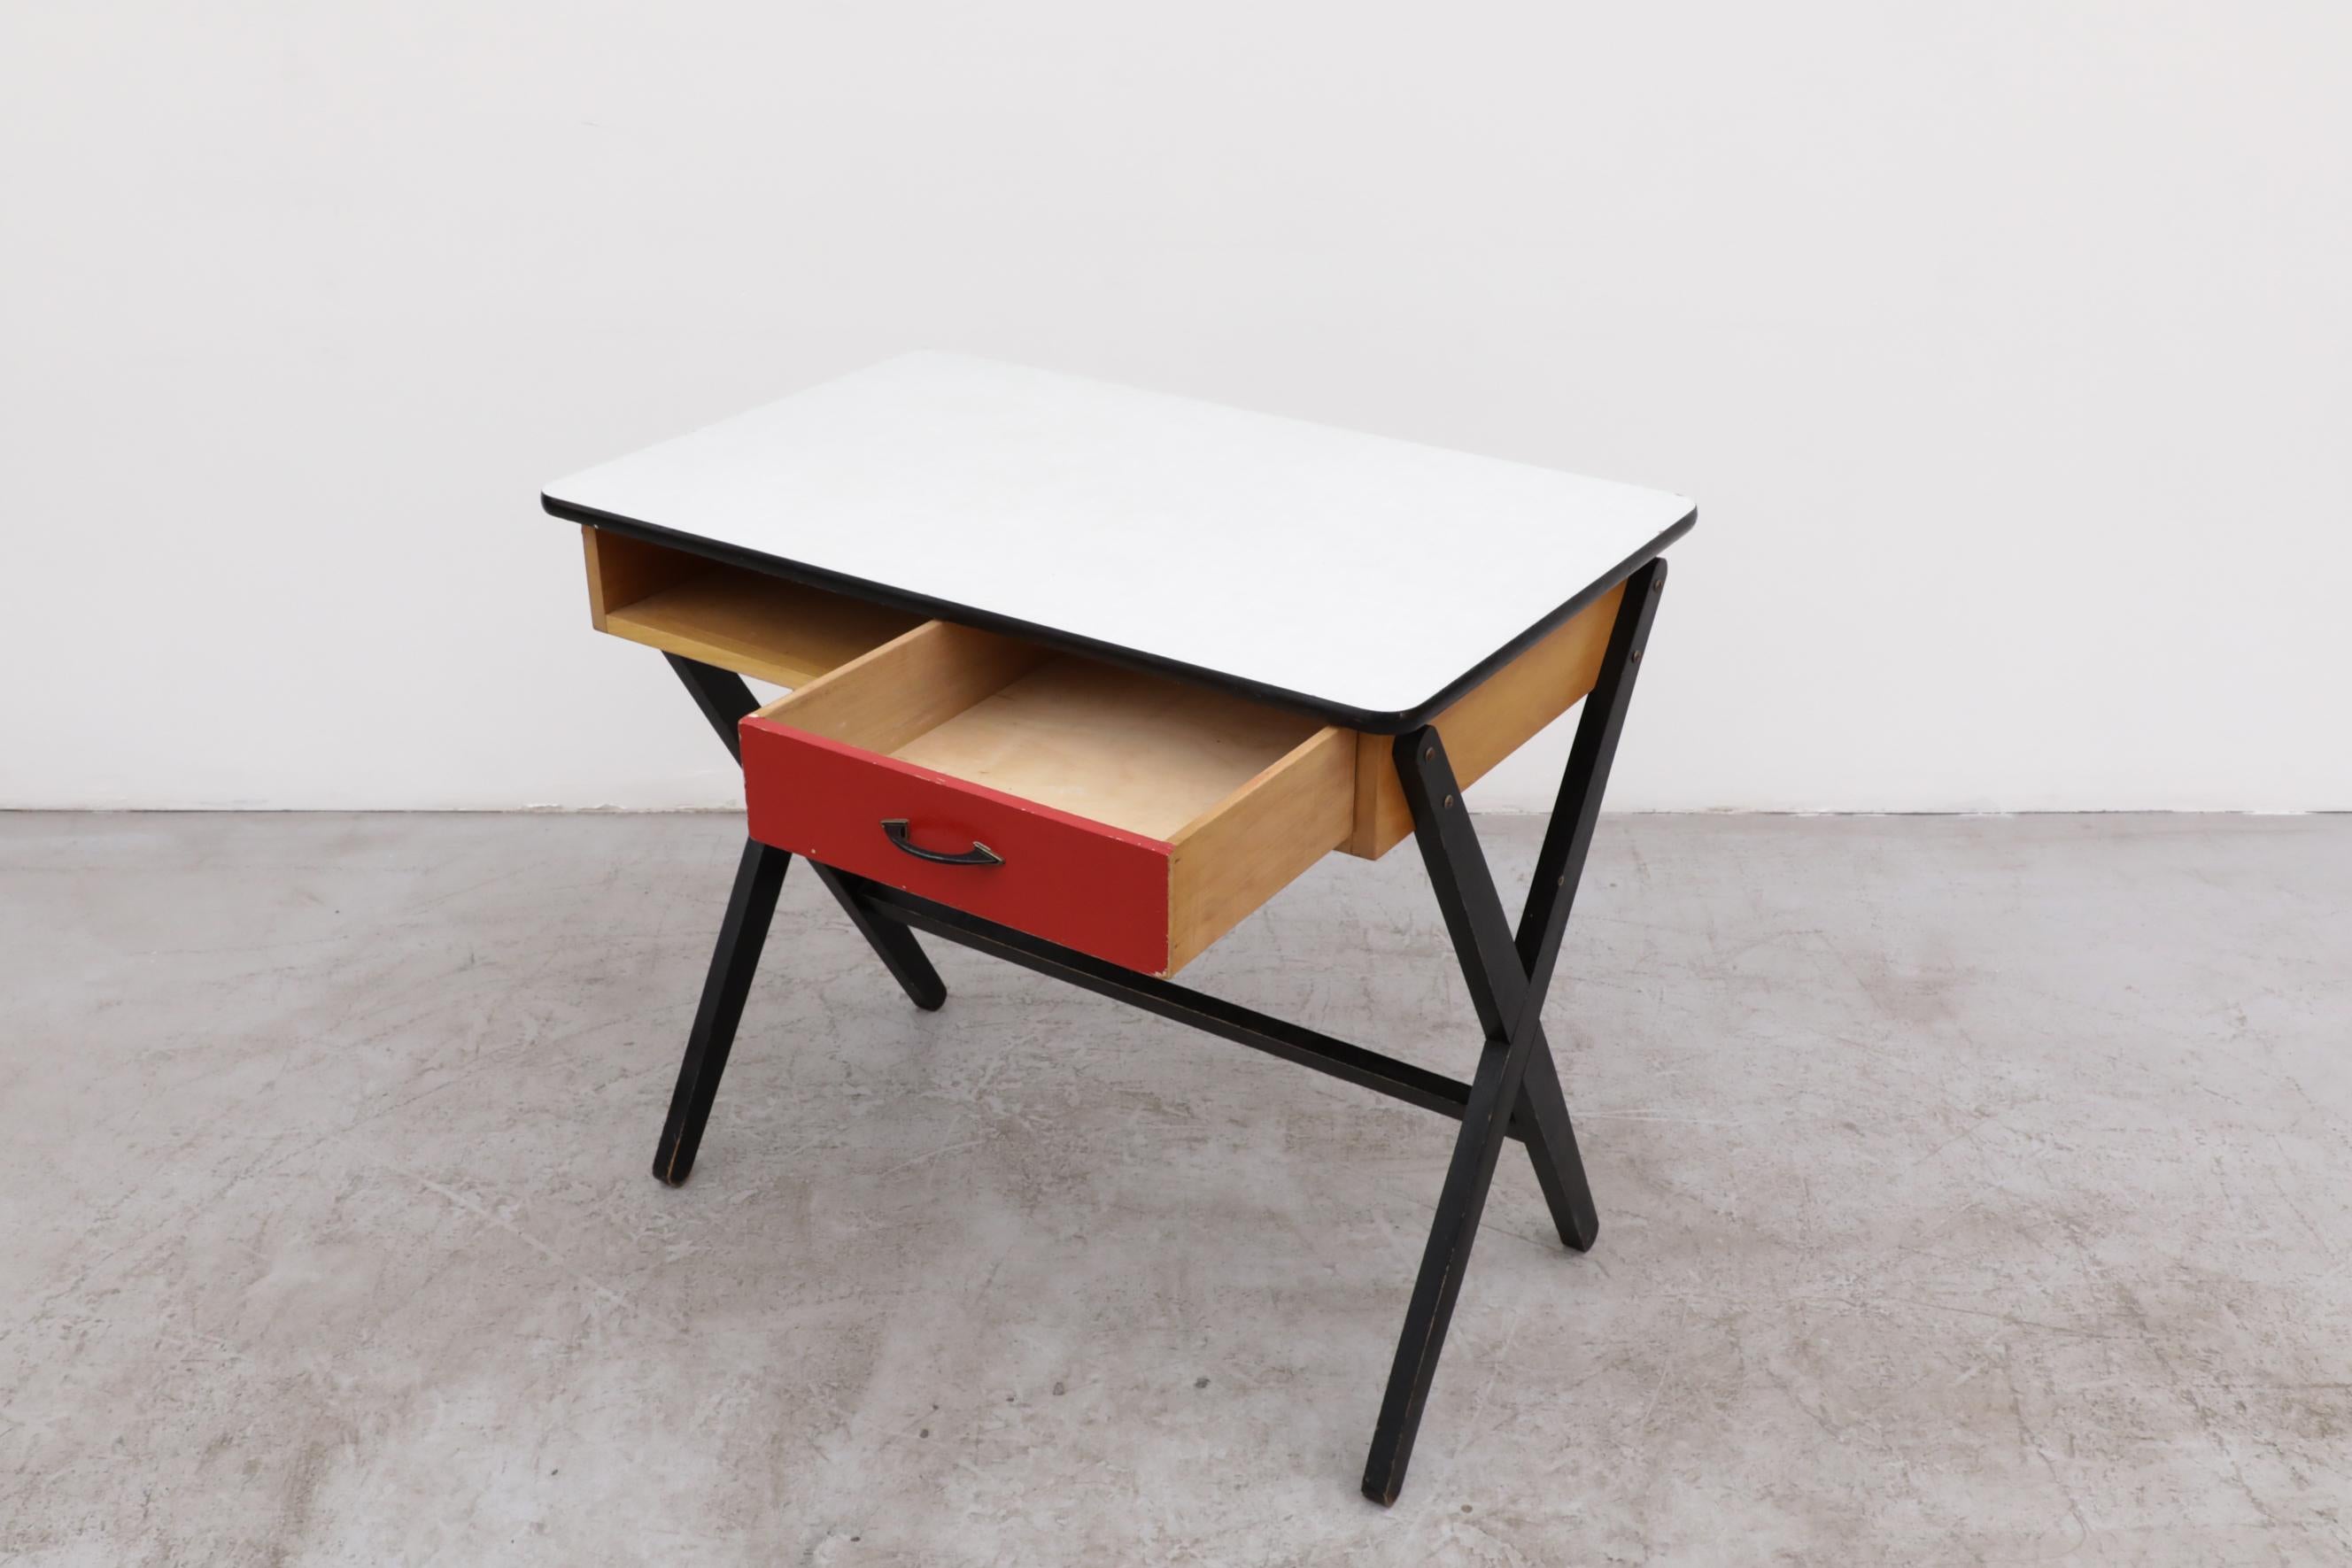 1954 Coen de Vries Desk in Birch w/ Ebony Base, Red Drawer and Formica Top For Sale 7